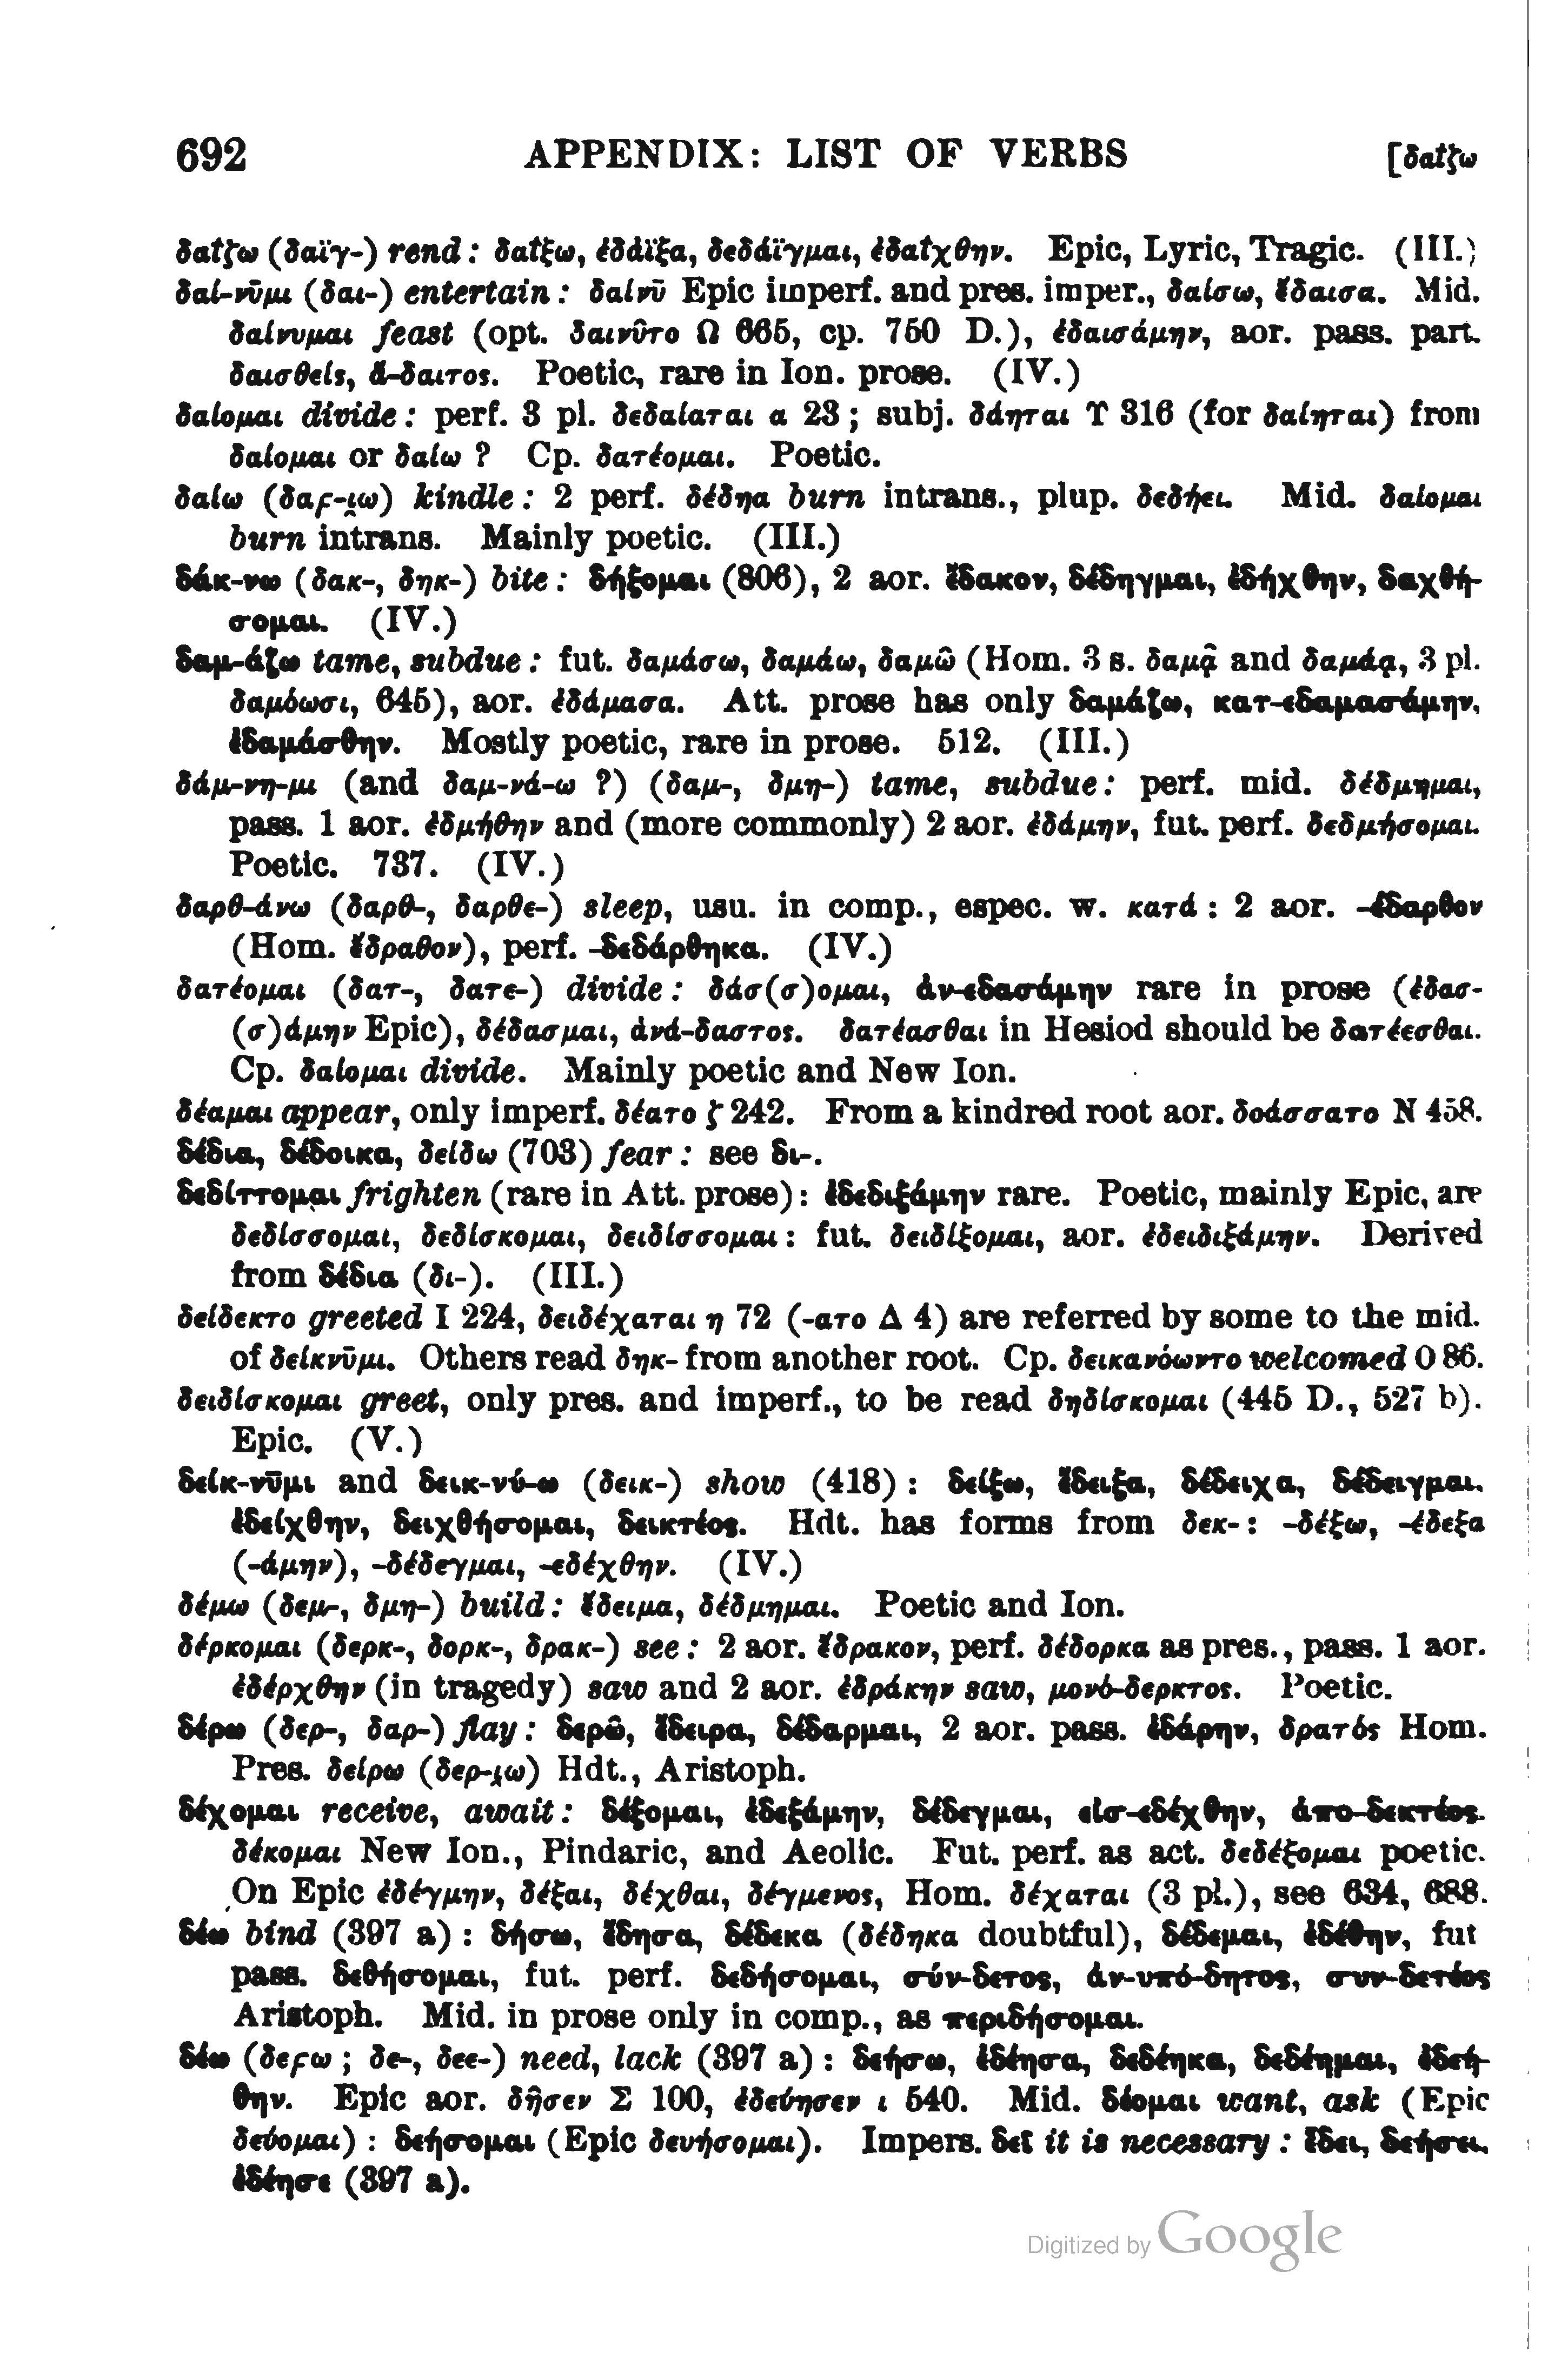 page from Smyth's catalogue of verbs